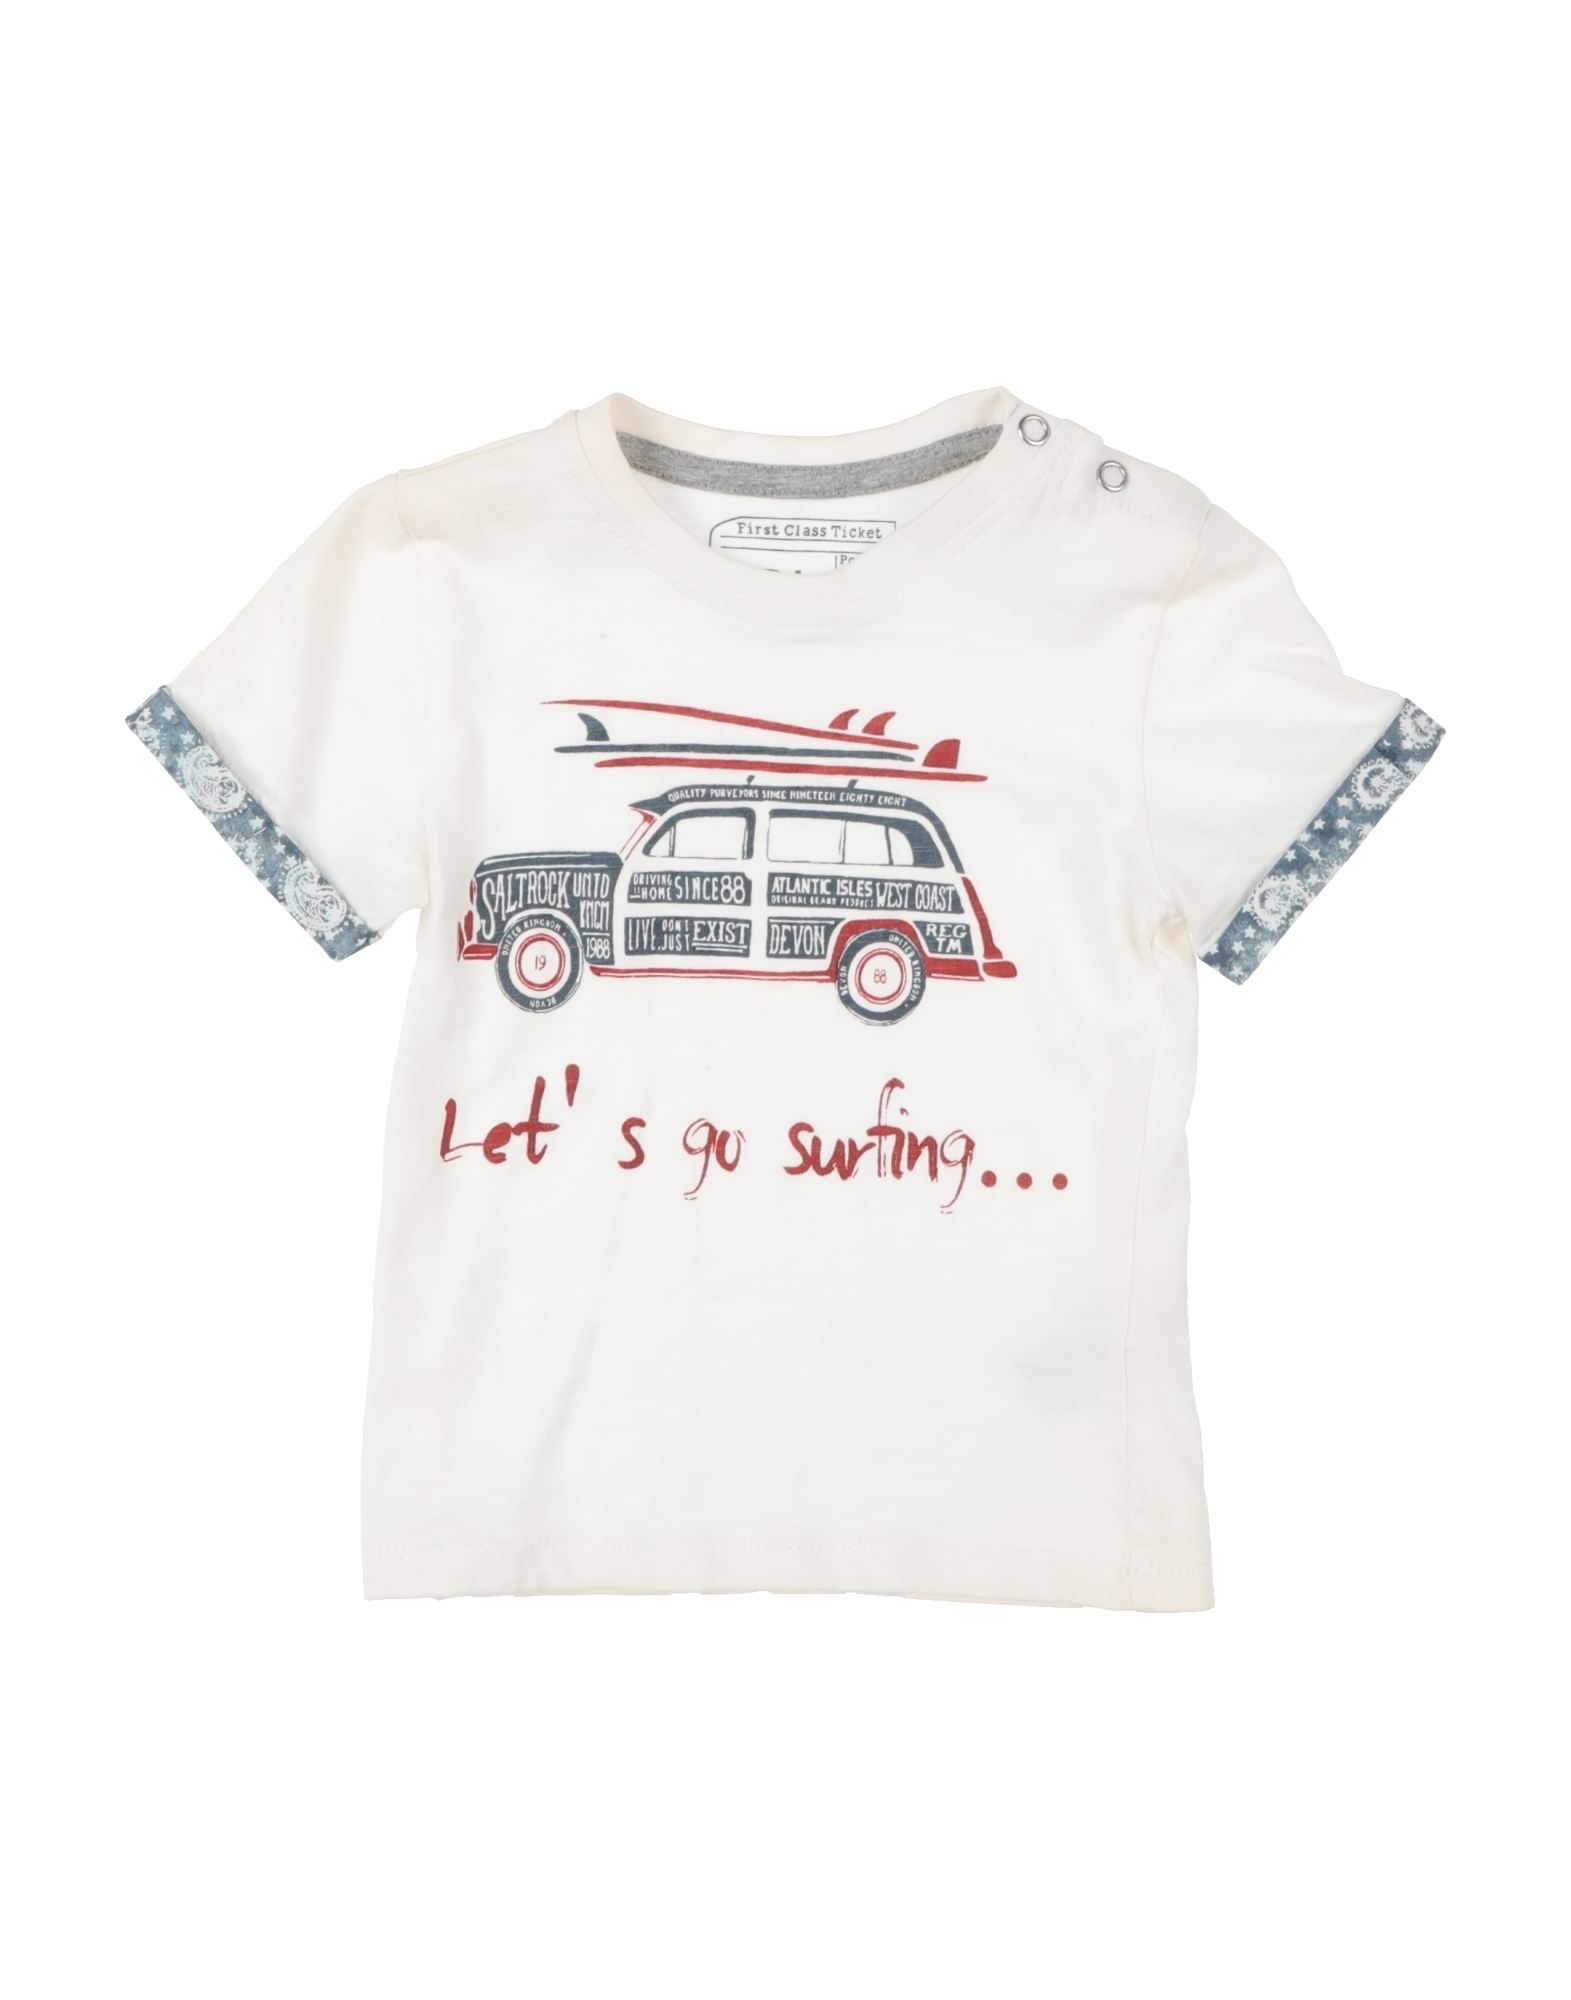 Sp1 Kids' T-shirts In White